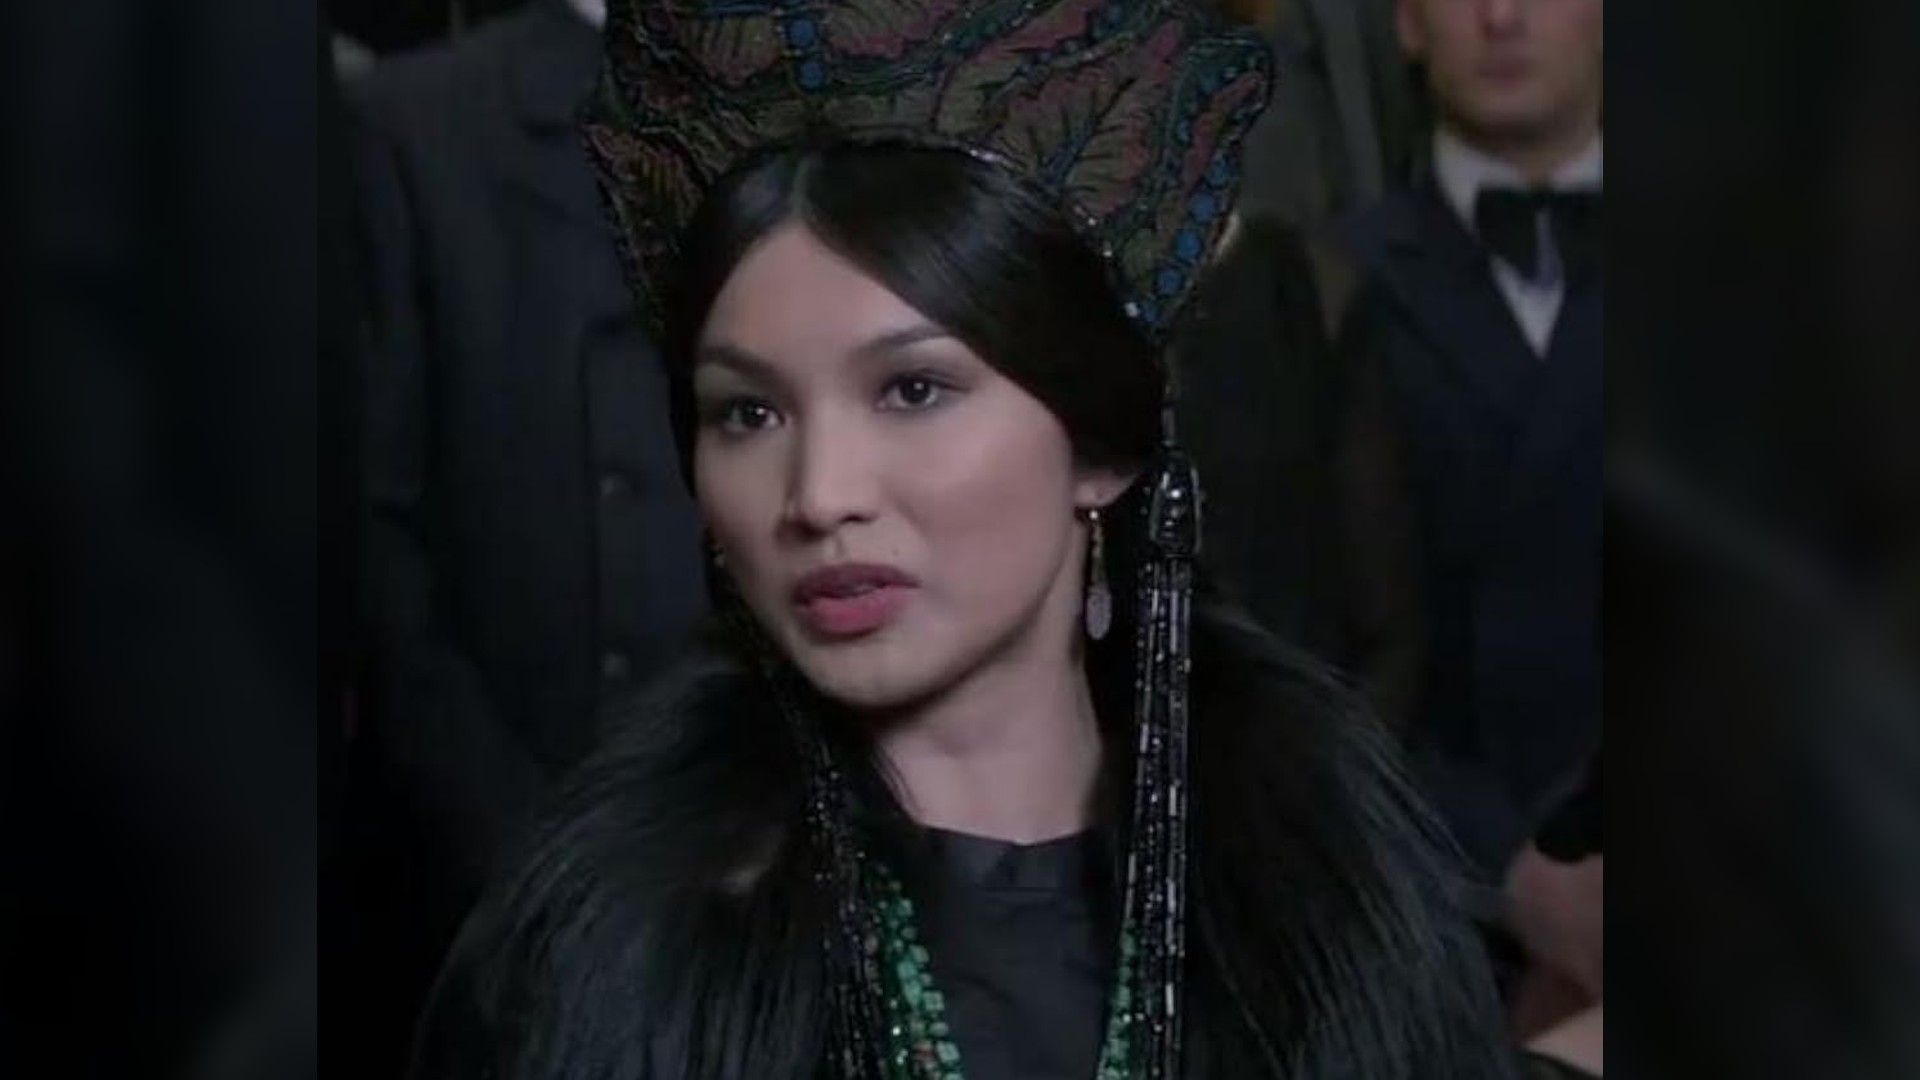 Gemma Chan in the movie ‘Fantastic Beasts and Where to Find Them’